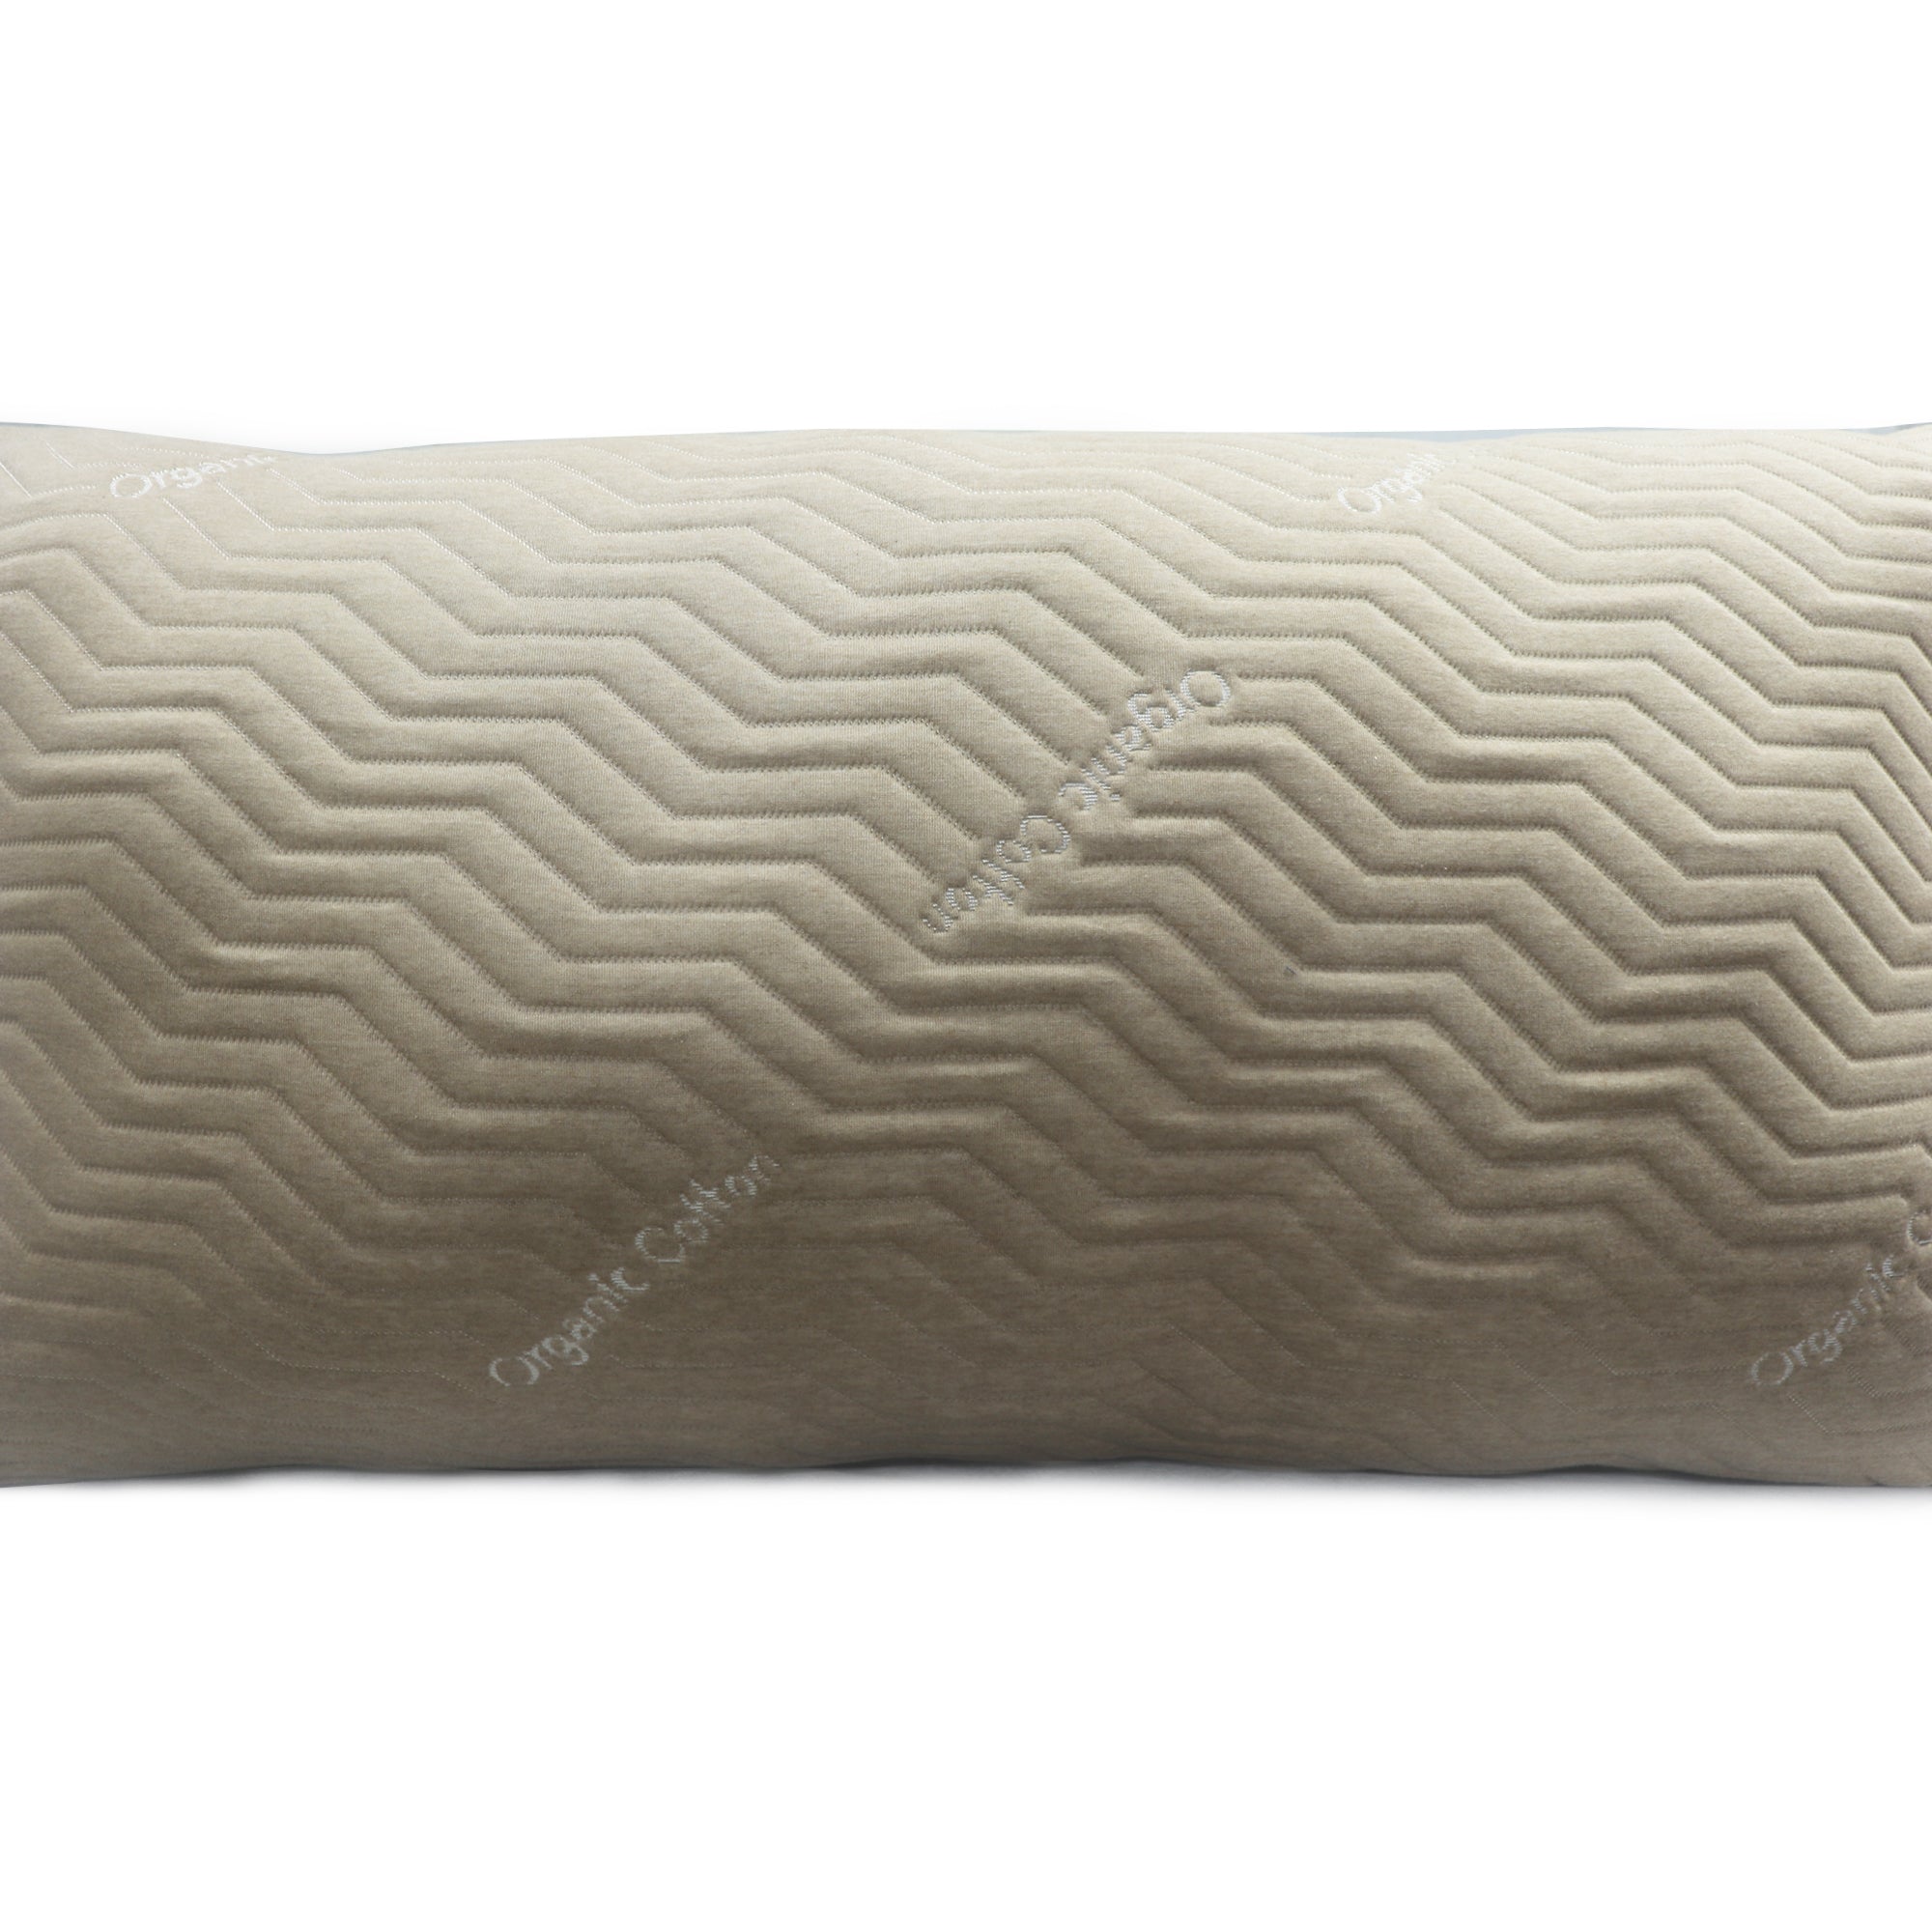 Coozly Weighted Pillow Beige- 20 X 36 inches | All season